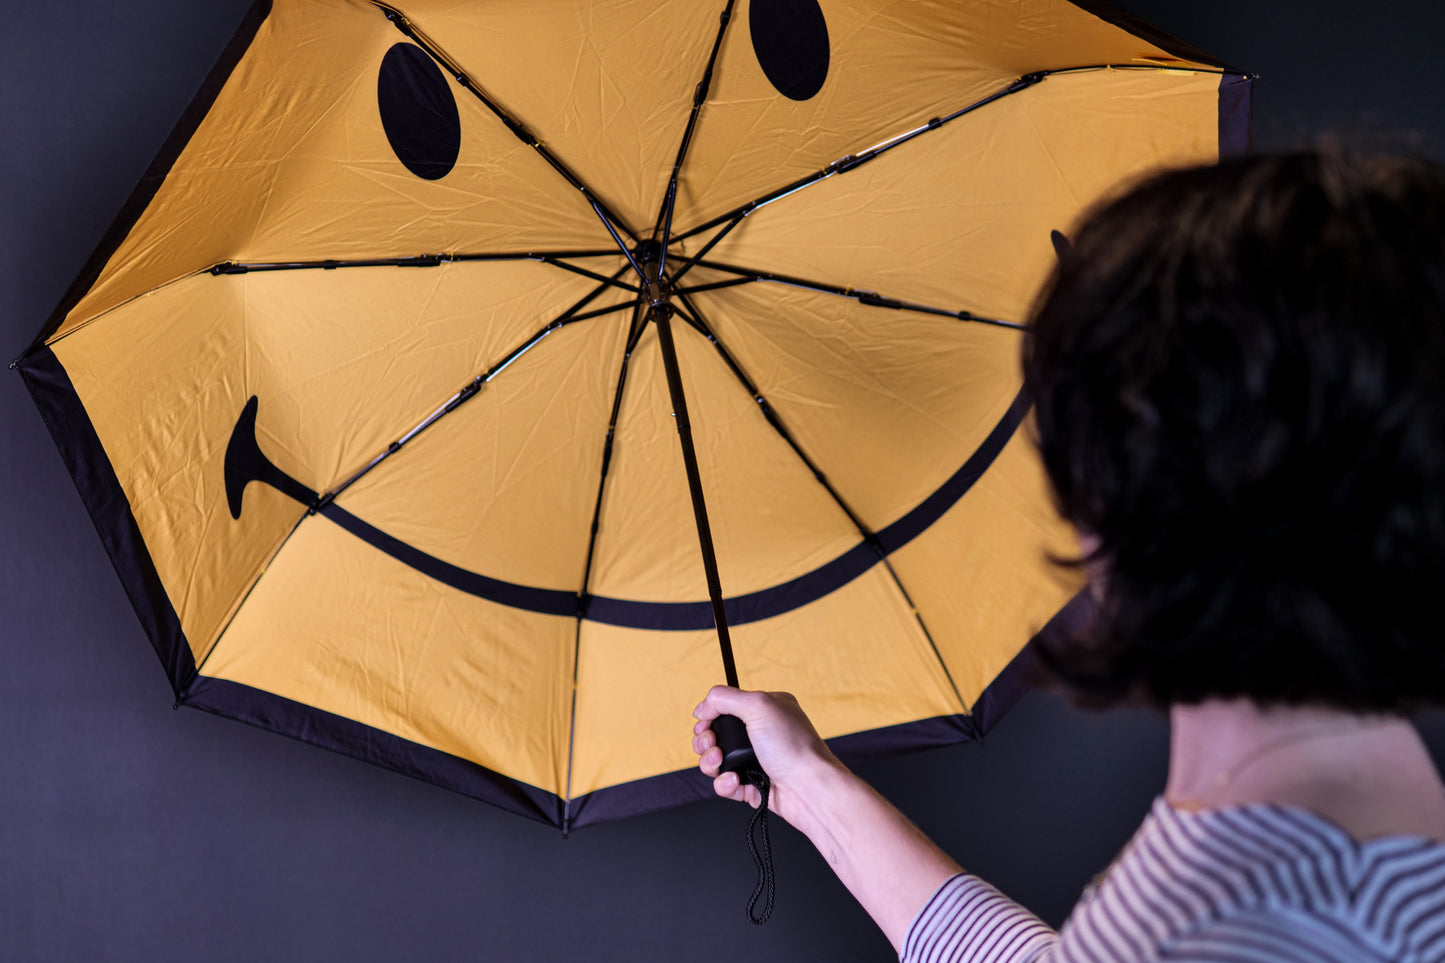 Woman holding an open umbrella with a yellow smiley face inside